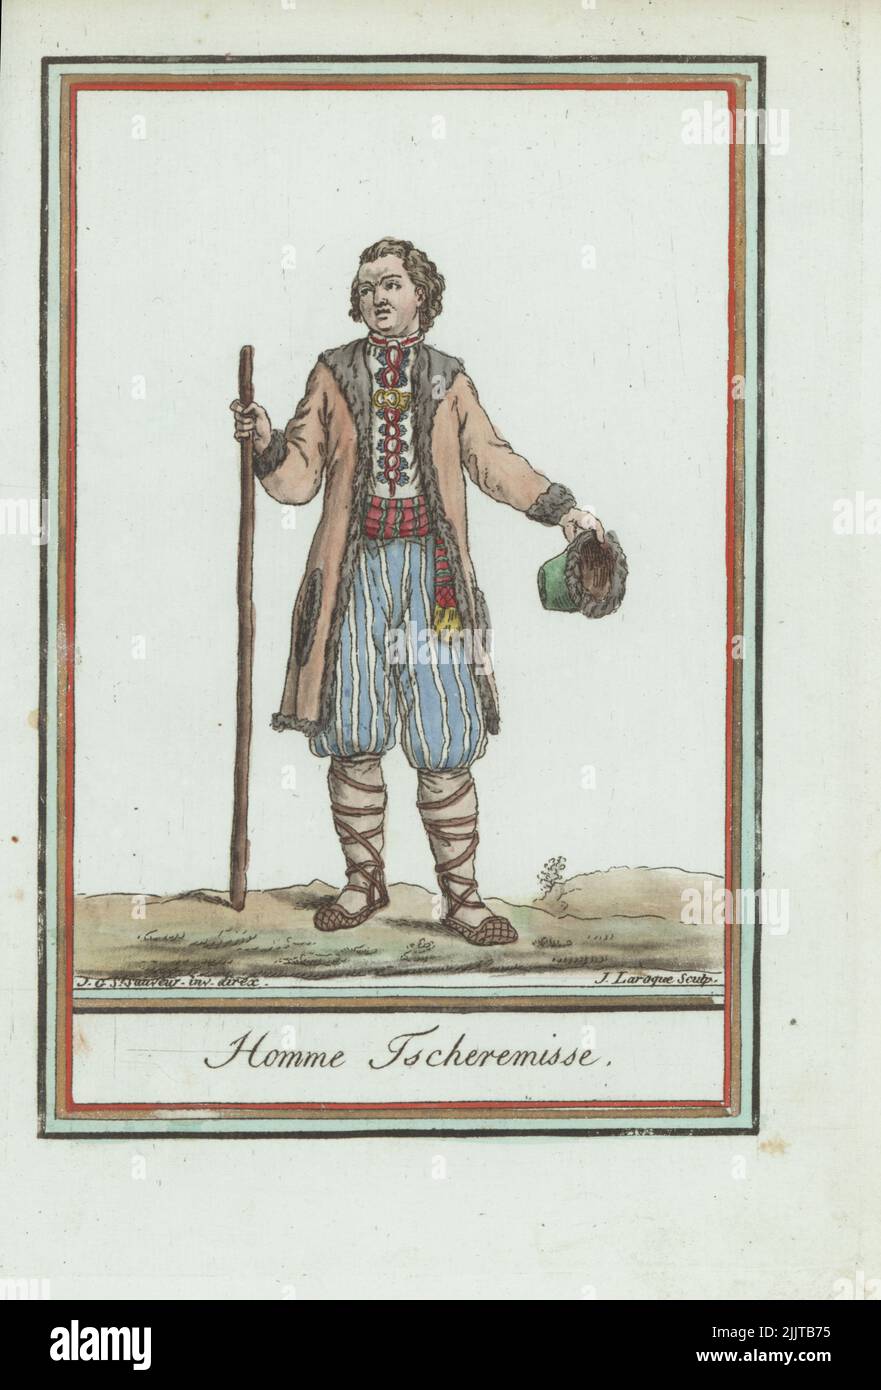 Man of the Mari people (Cheremisa or Cheremis) of Russia. In furred jerkin coat, embroidered linen shirt, sash, culottes, gaiters, shoes, holding a staff and fur cap. Homme Tscheremisse. Handcoloured copperplate engraving by J. Laroque after a design by Jacques Grasset de Saint-Sauveur from his Encyclopedie des voyages, Encyclopedia of Voyages, Bordeaux, France, 1792. Stock Photo